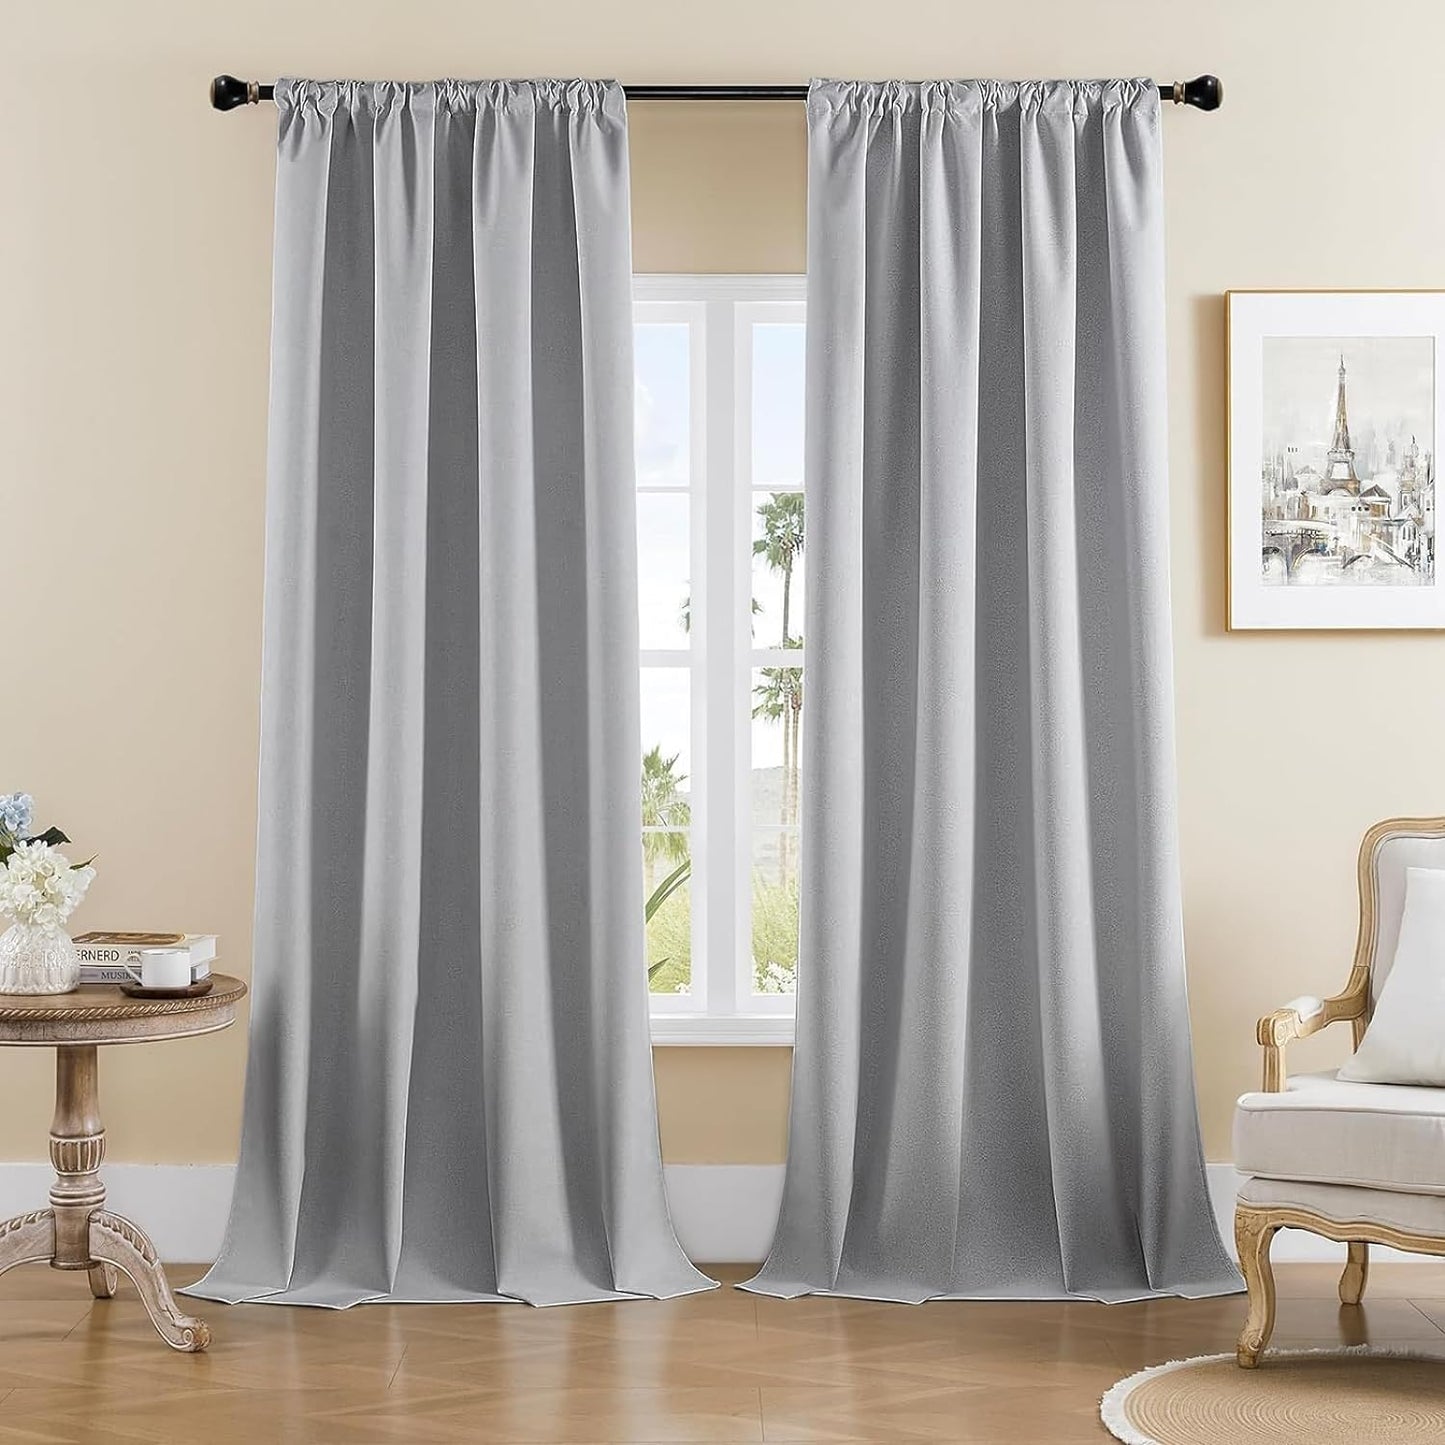 Joydeco Faux Linen Blackout Curtains for Bedroom,Light Grey Blackout Curtains 96 Inches Long,100% Blackout Sound Proof Thermal Insulated Window Drapes Luxury Decor（W52Xl96 Inch,Light Grey）  Joydeco Light Grey 52W X 108L Inch X 2 Panels 